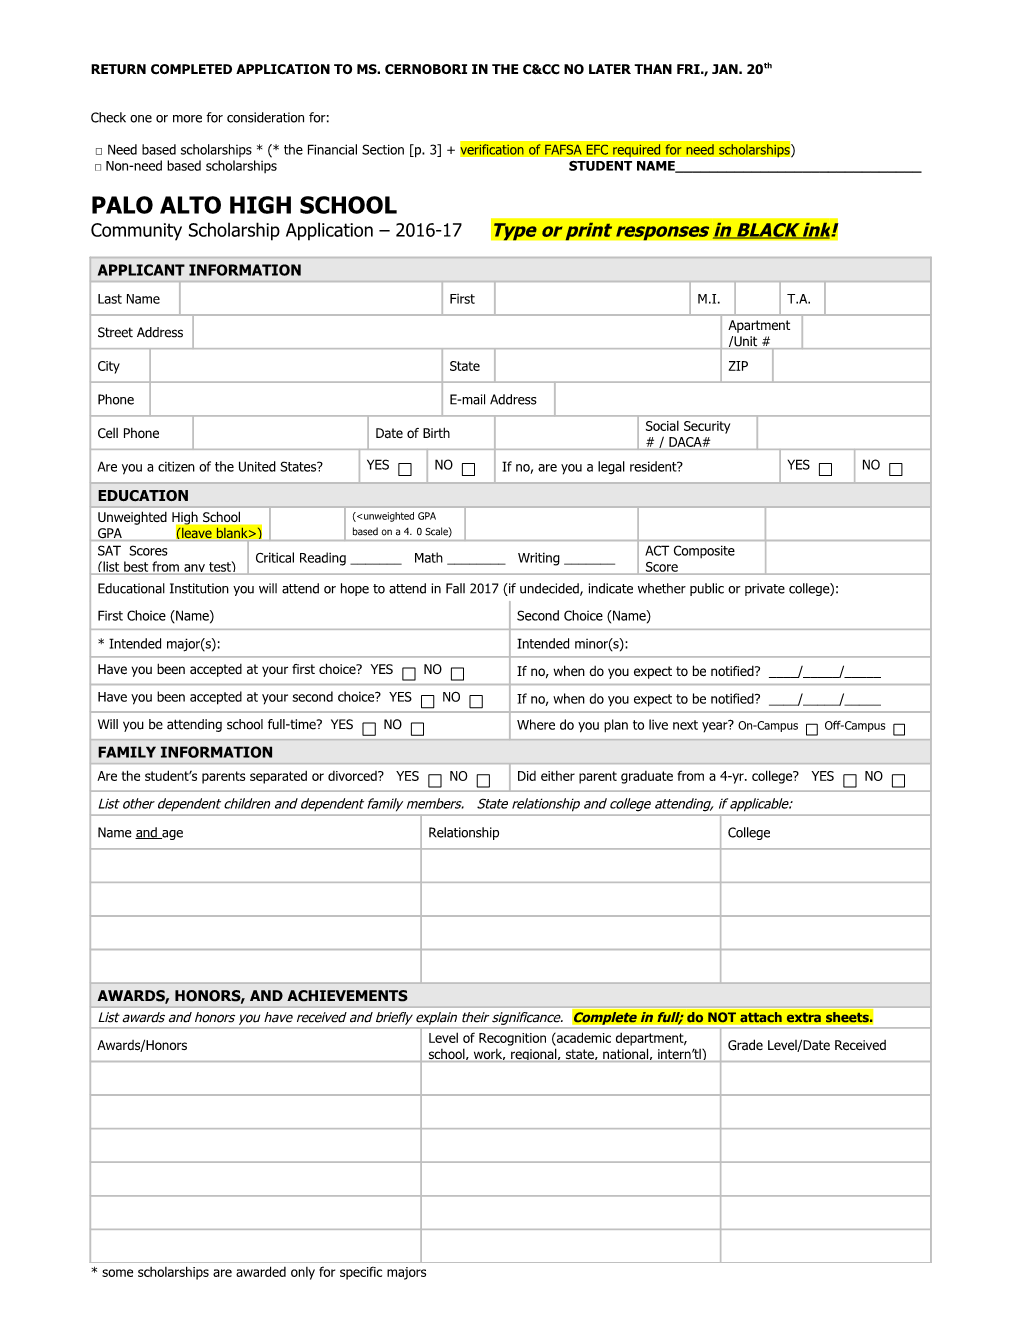 RETURN COMPLETED APPLICATION to MS. CERNOBORI in the C&CC NO LATER THAN FRI., JAN. 20Th